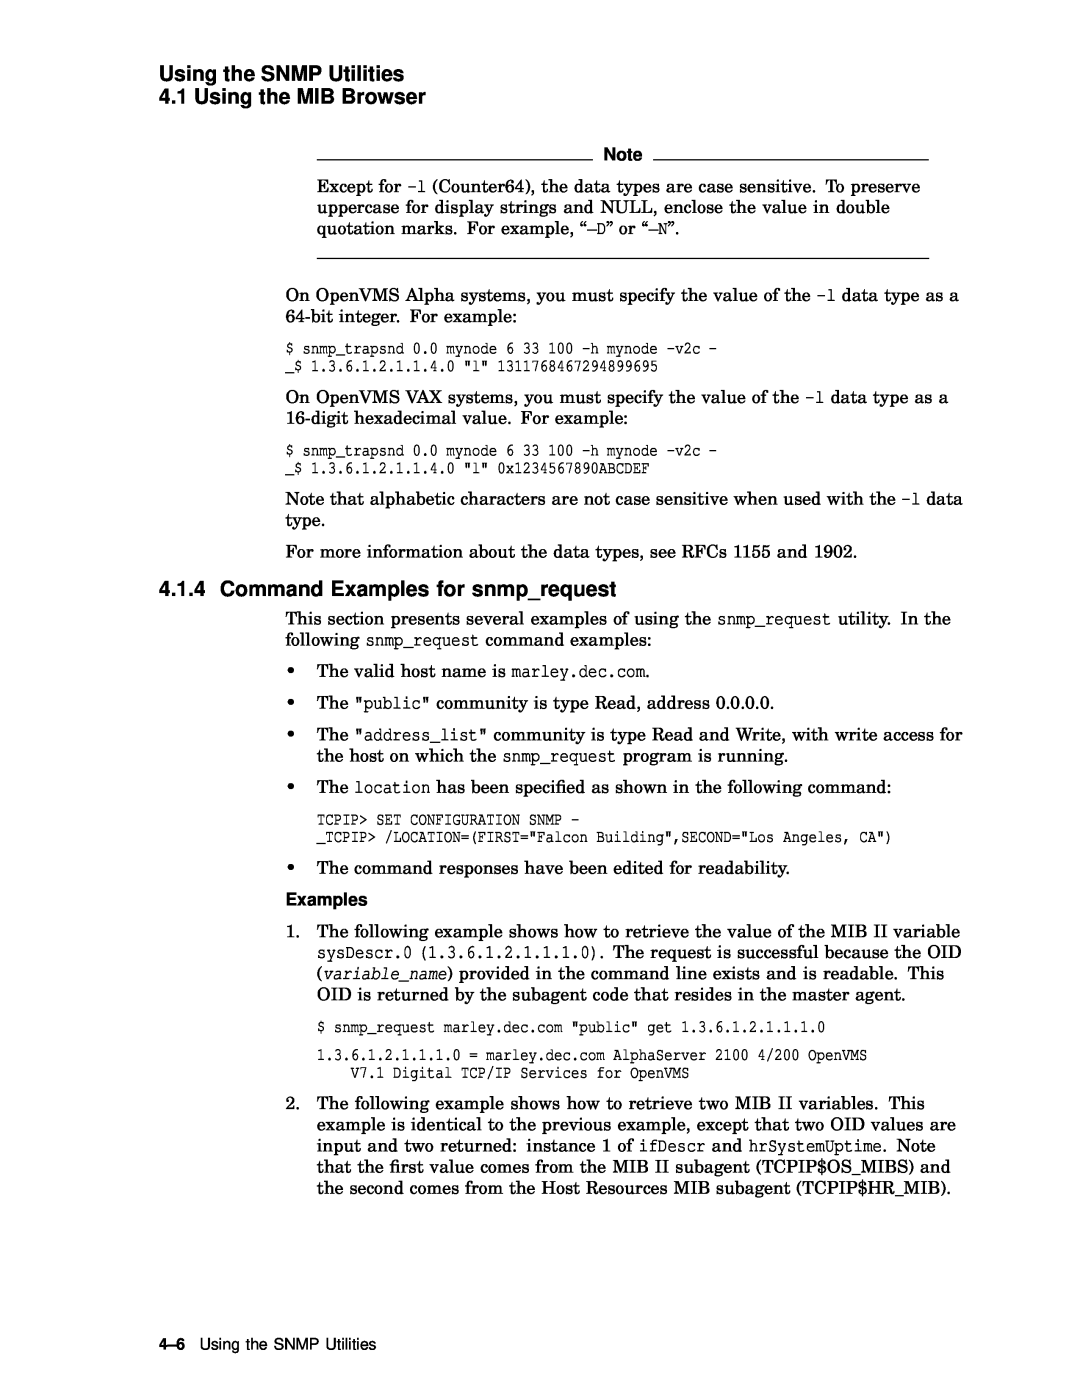 Compaq AAR04BCTE manual Command Examples for snmprequest, Using the SNMP Utilities 4.1 Using the MIB Browser 